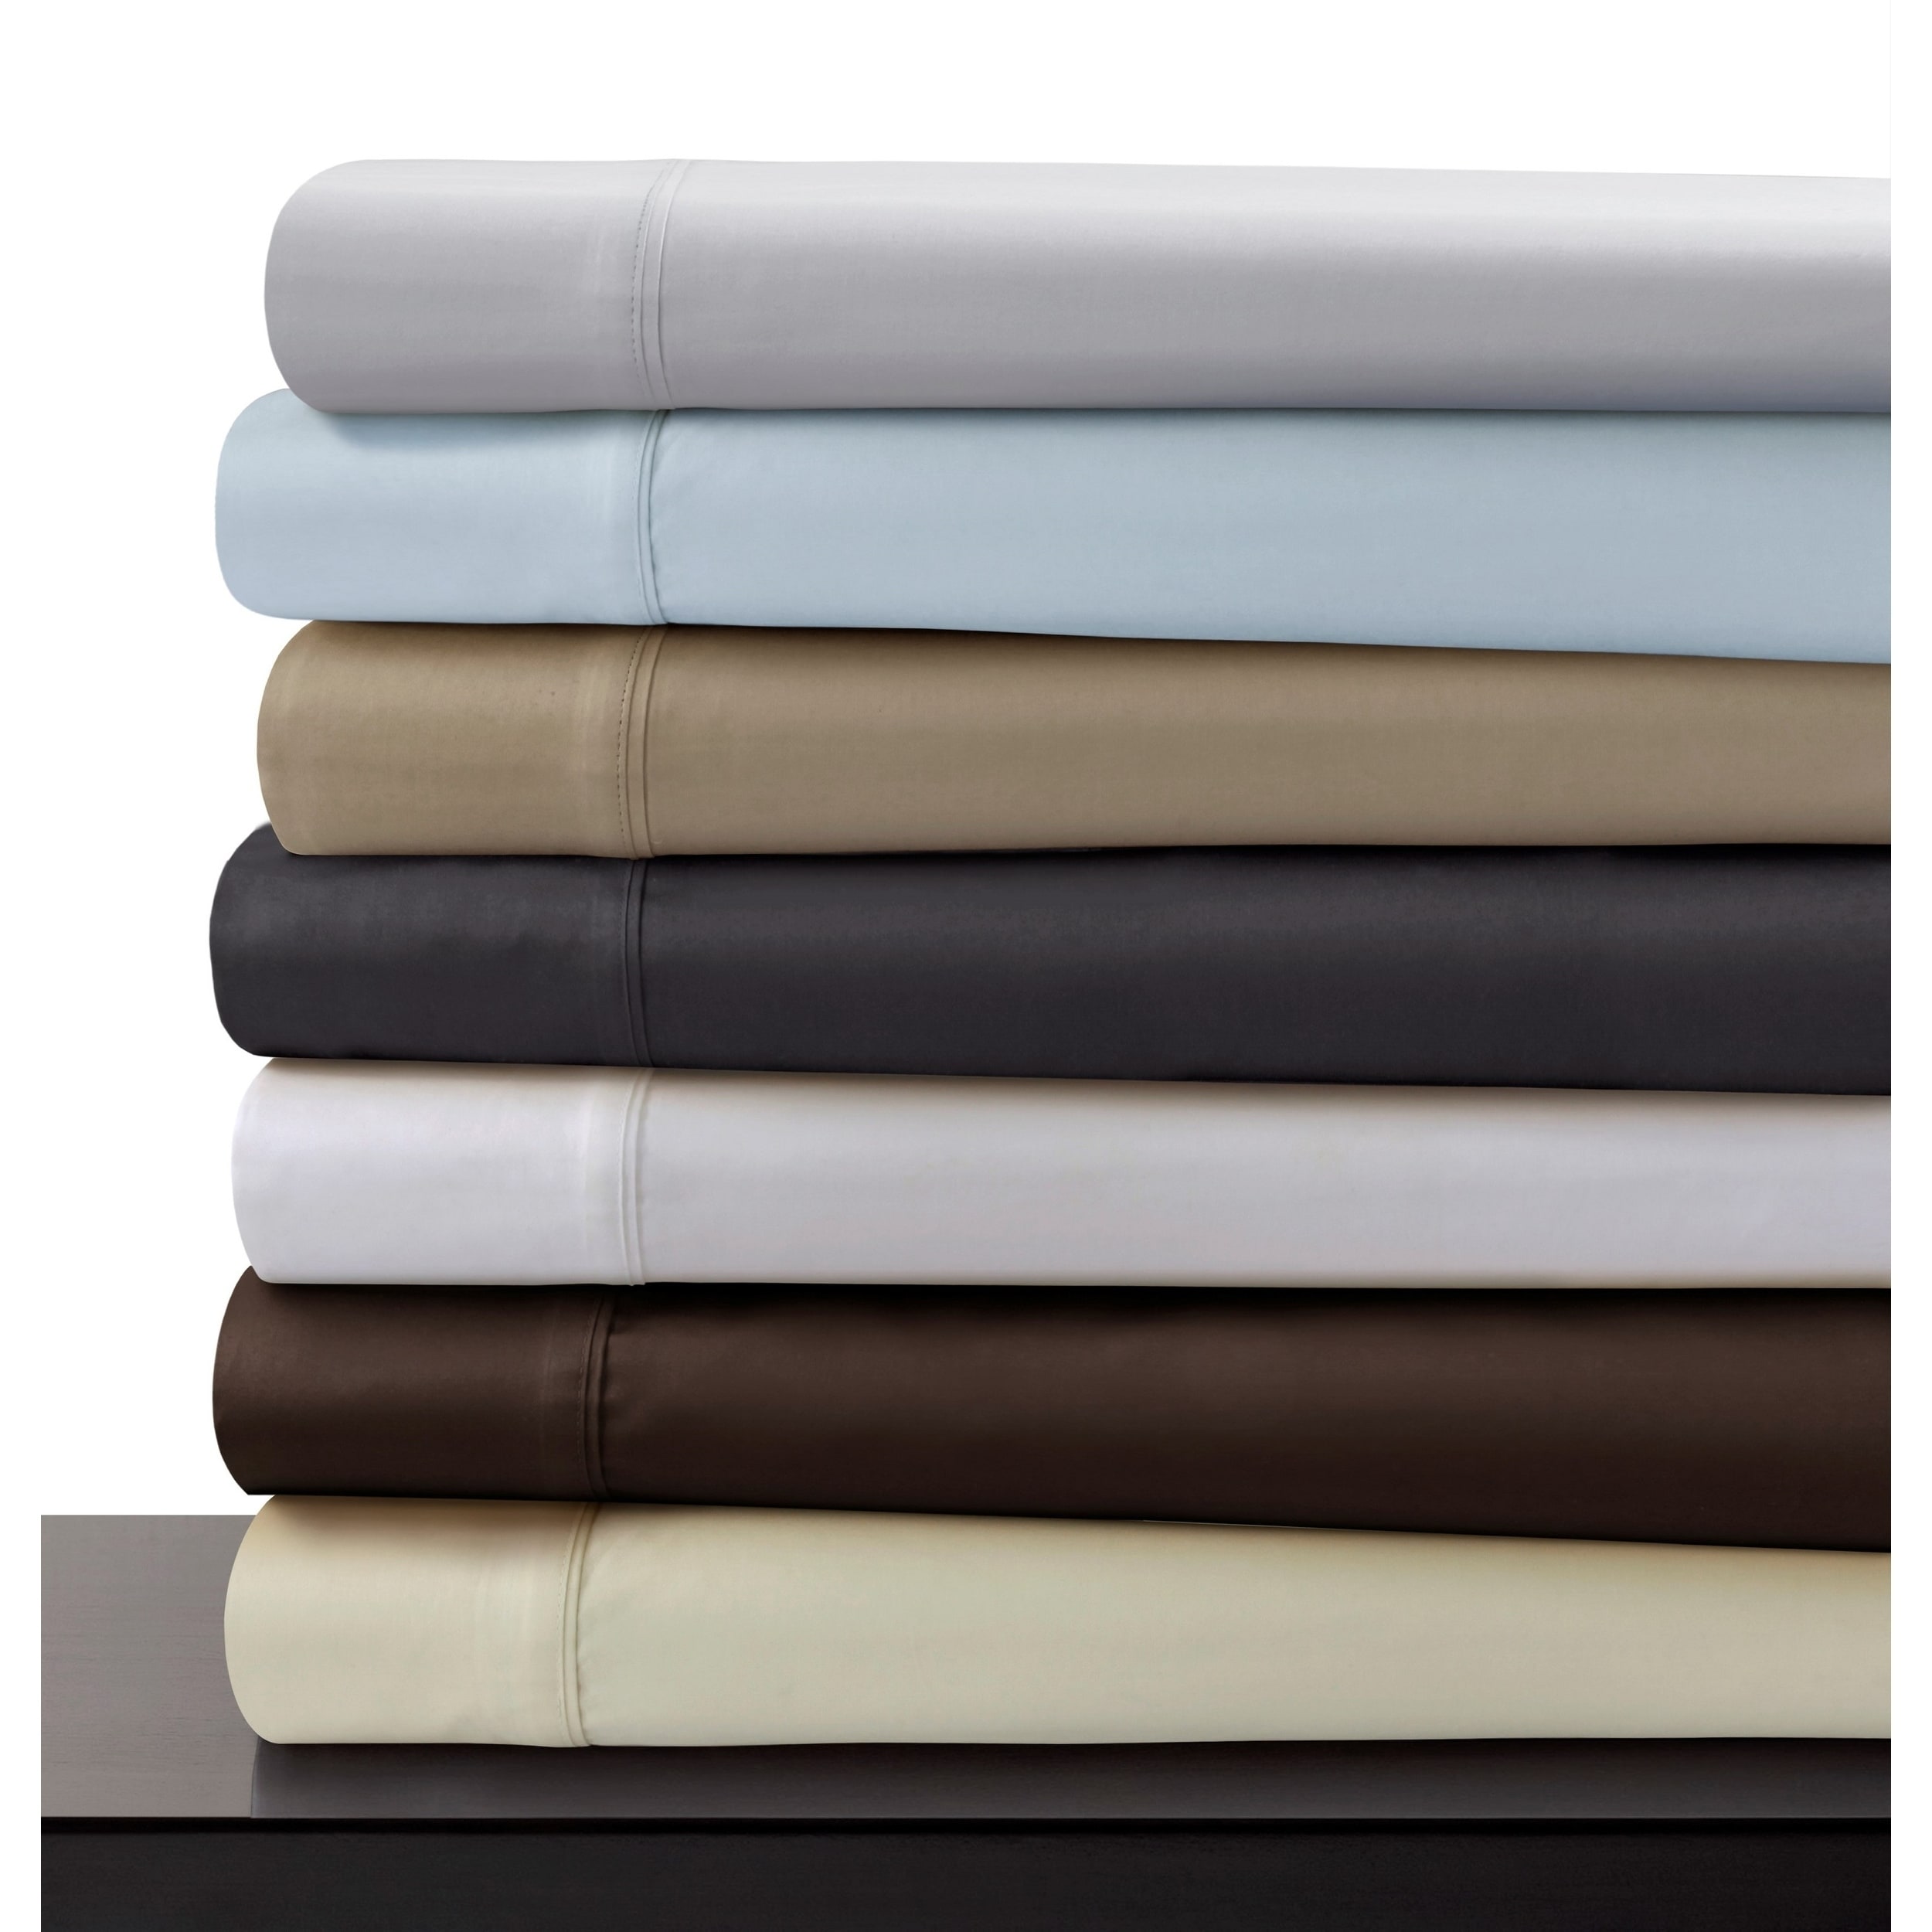 Details about   Egyptian Cotton Bedding Sheet Set 600 TC In Light blue,All Size And Deep Pocket